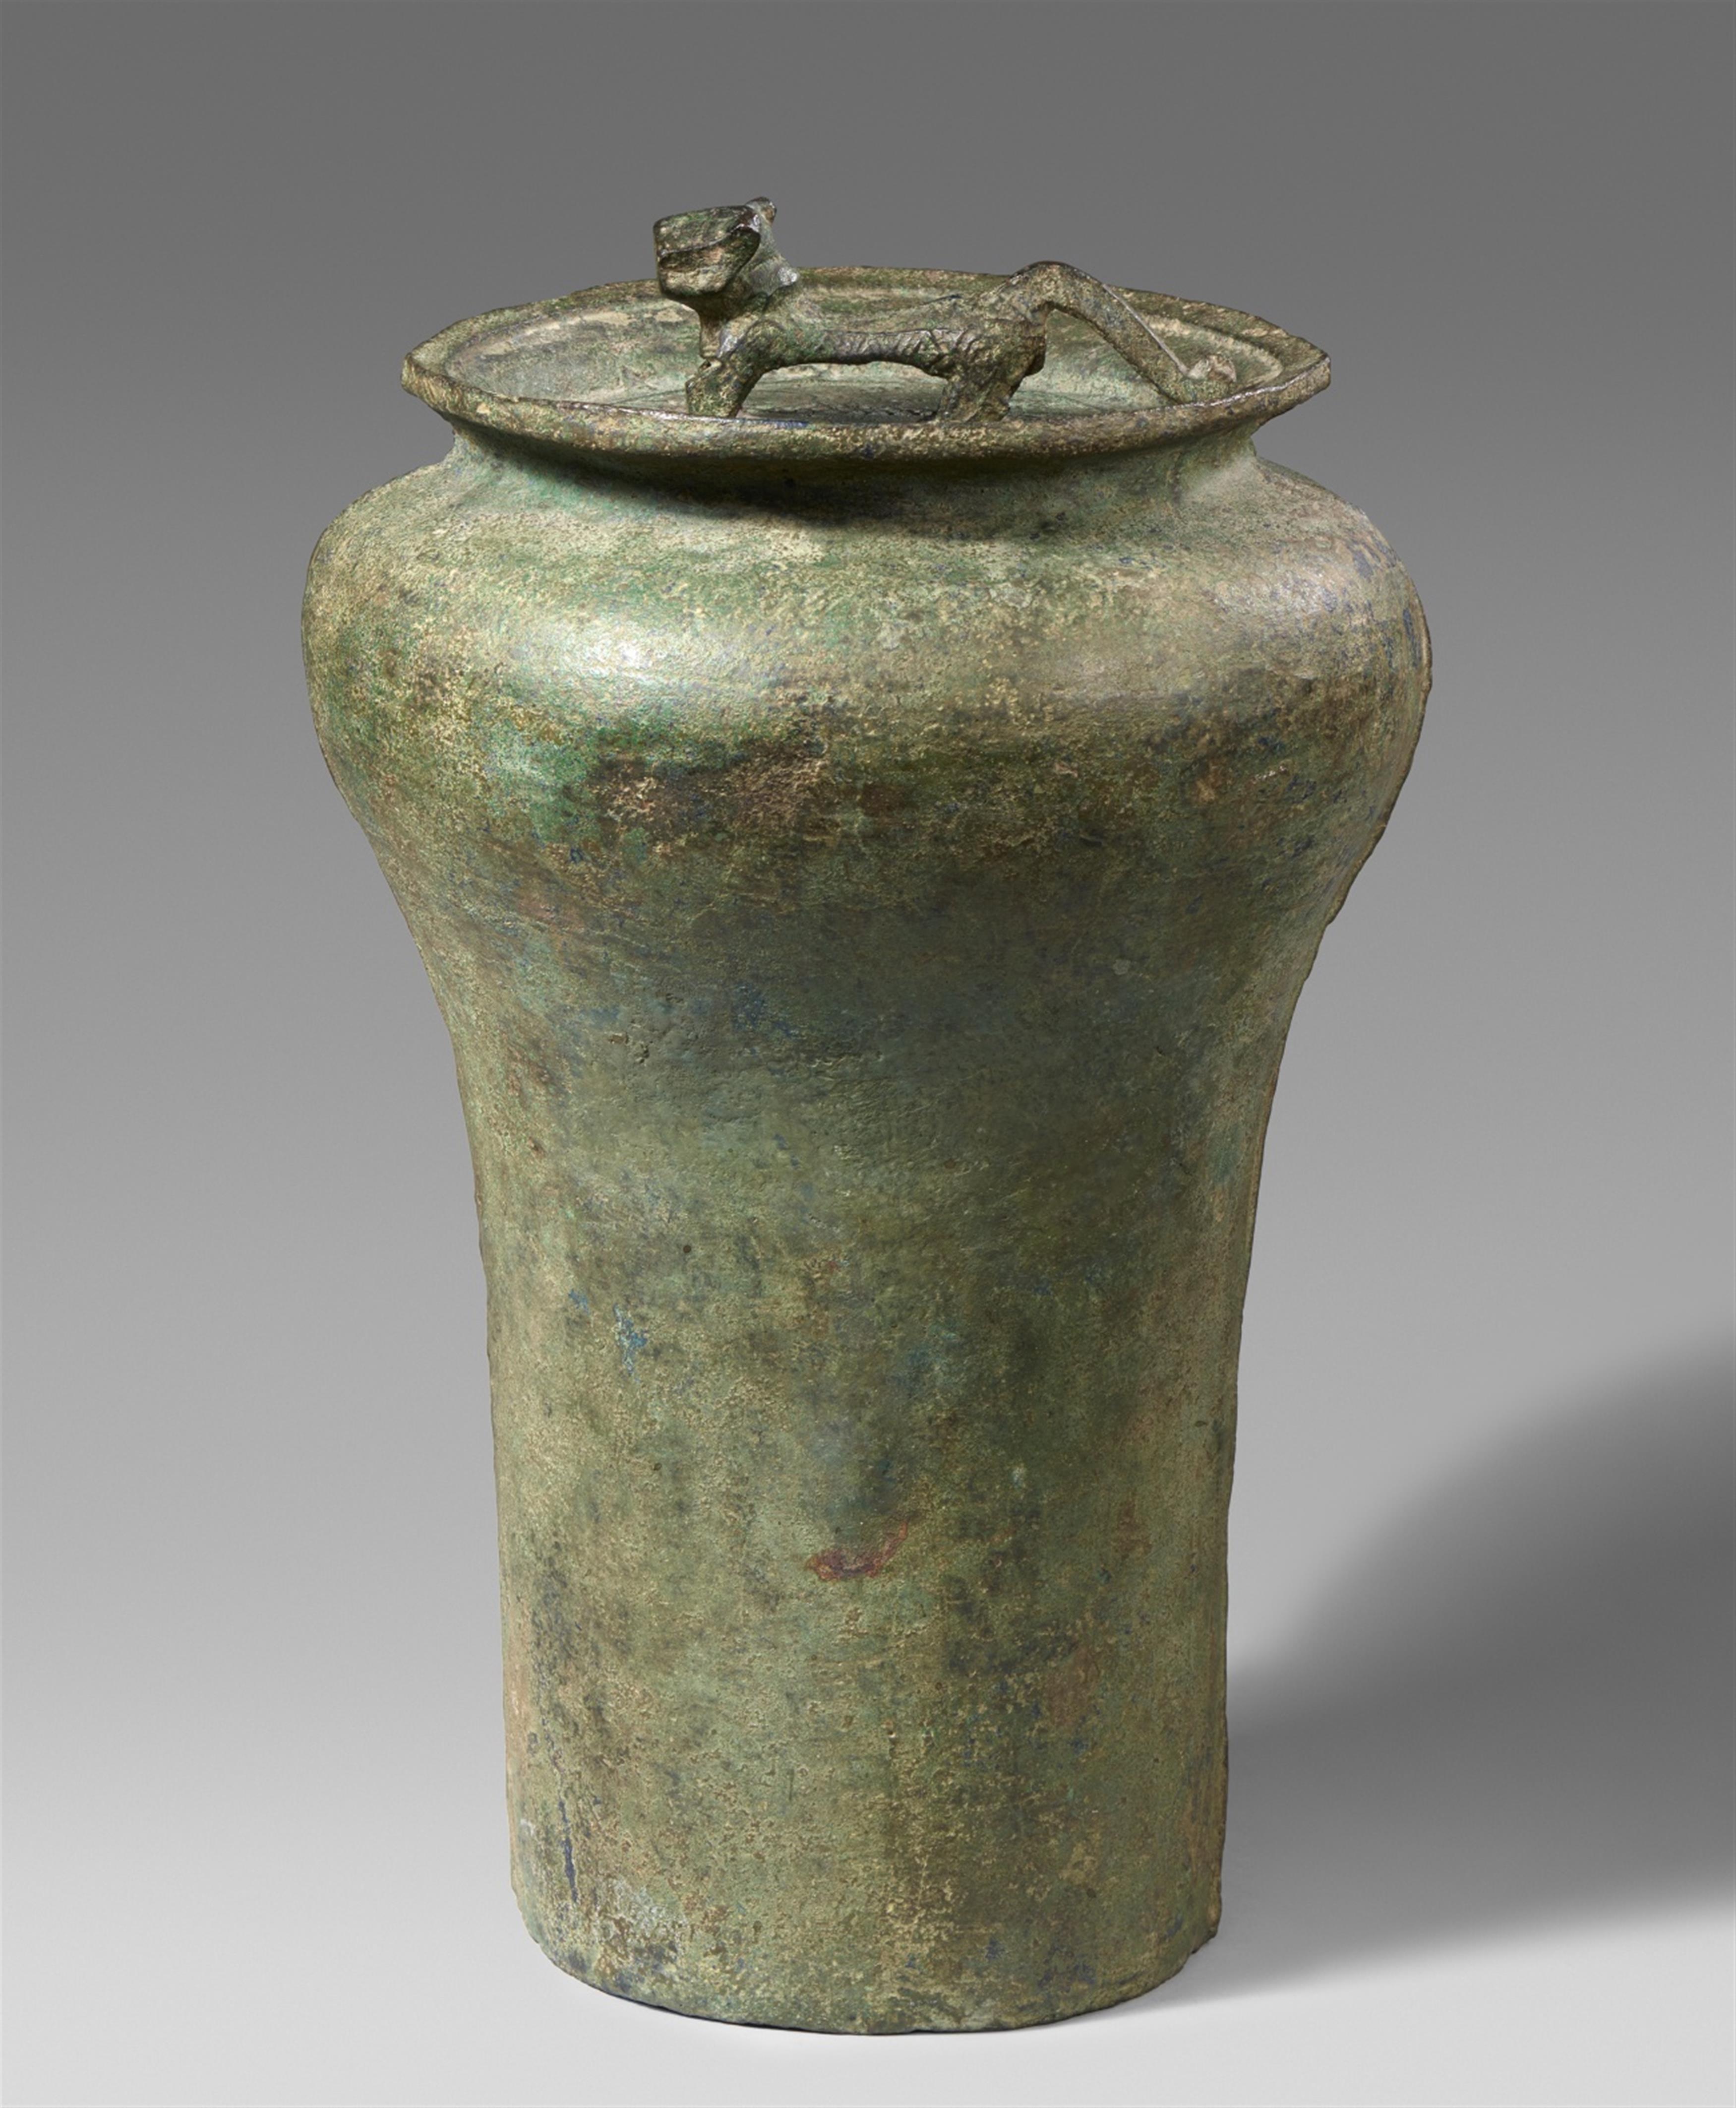 A large bronze military drum/bell. South-central/South-west China. Late Eastern Zhou/early Western Han dynasty, 3rd century BC - image-1